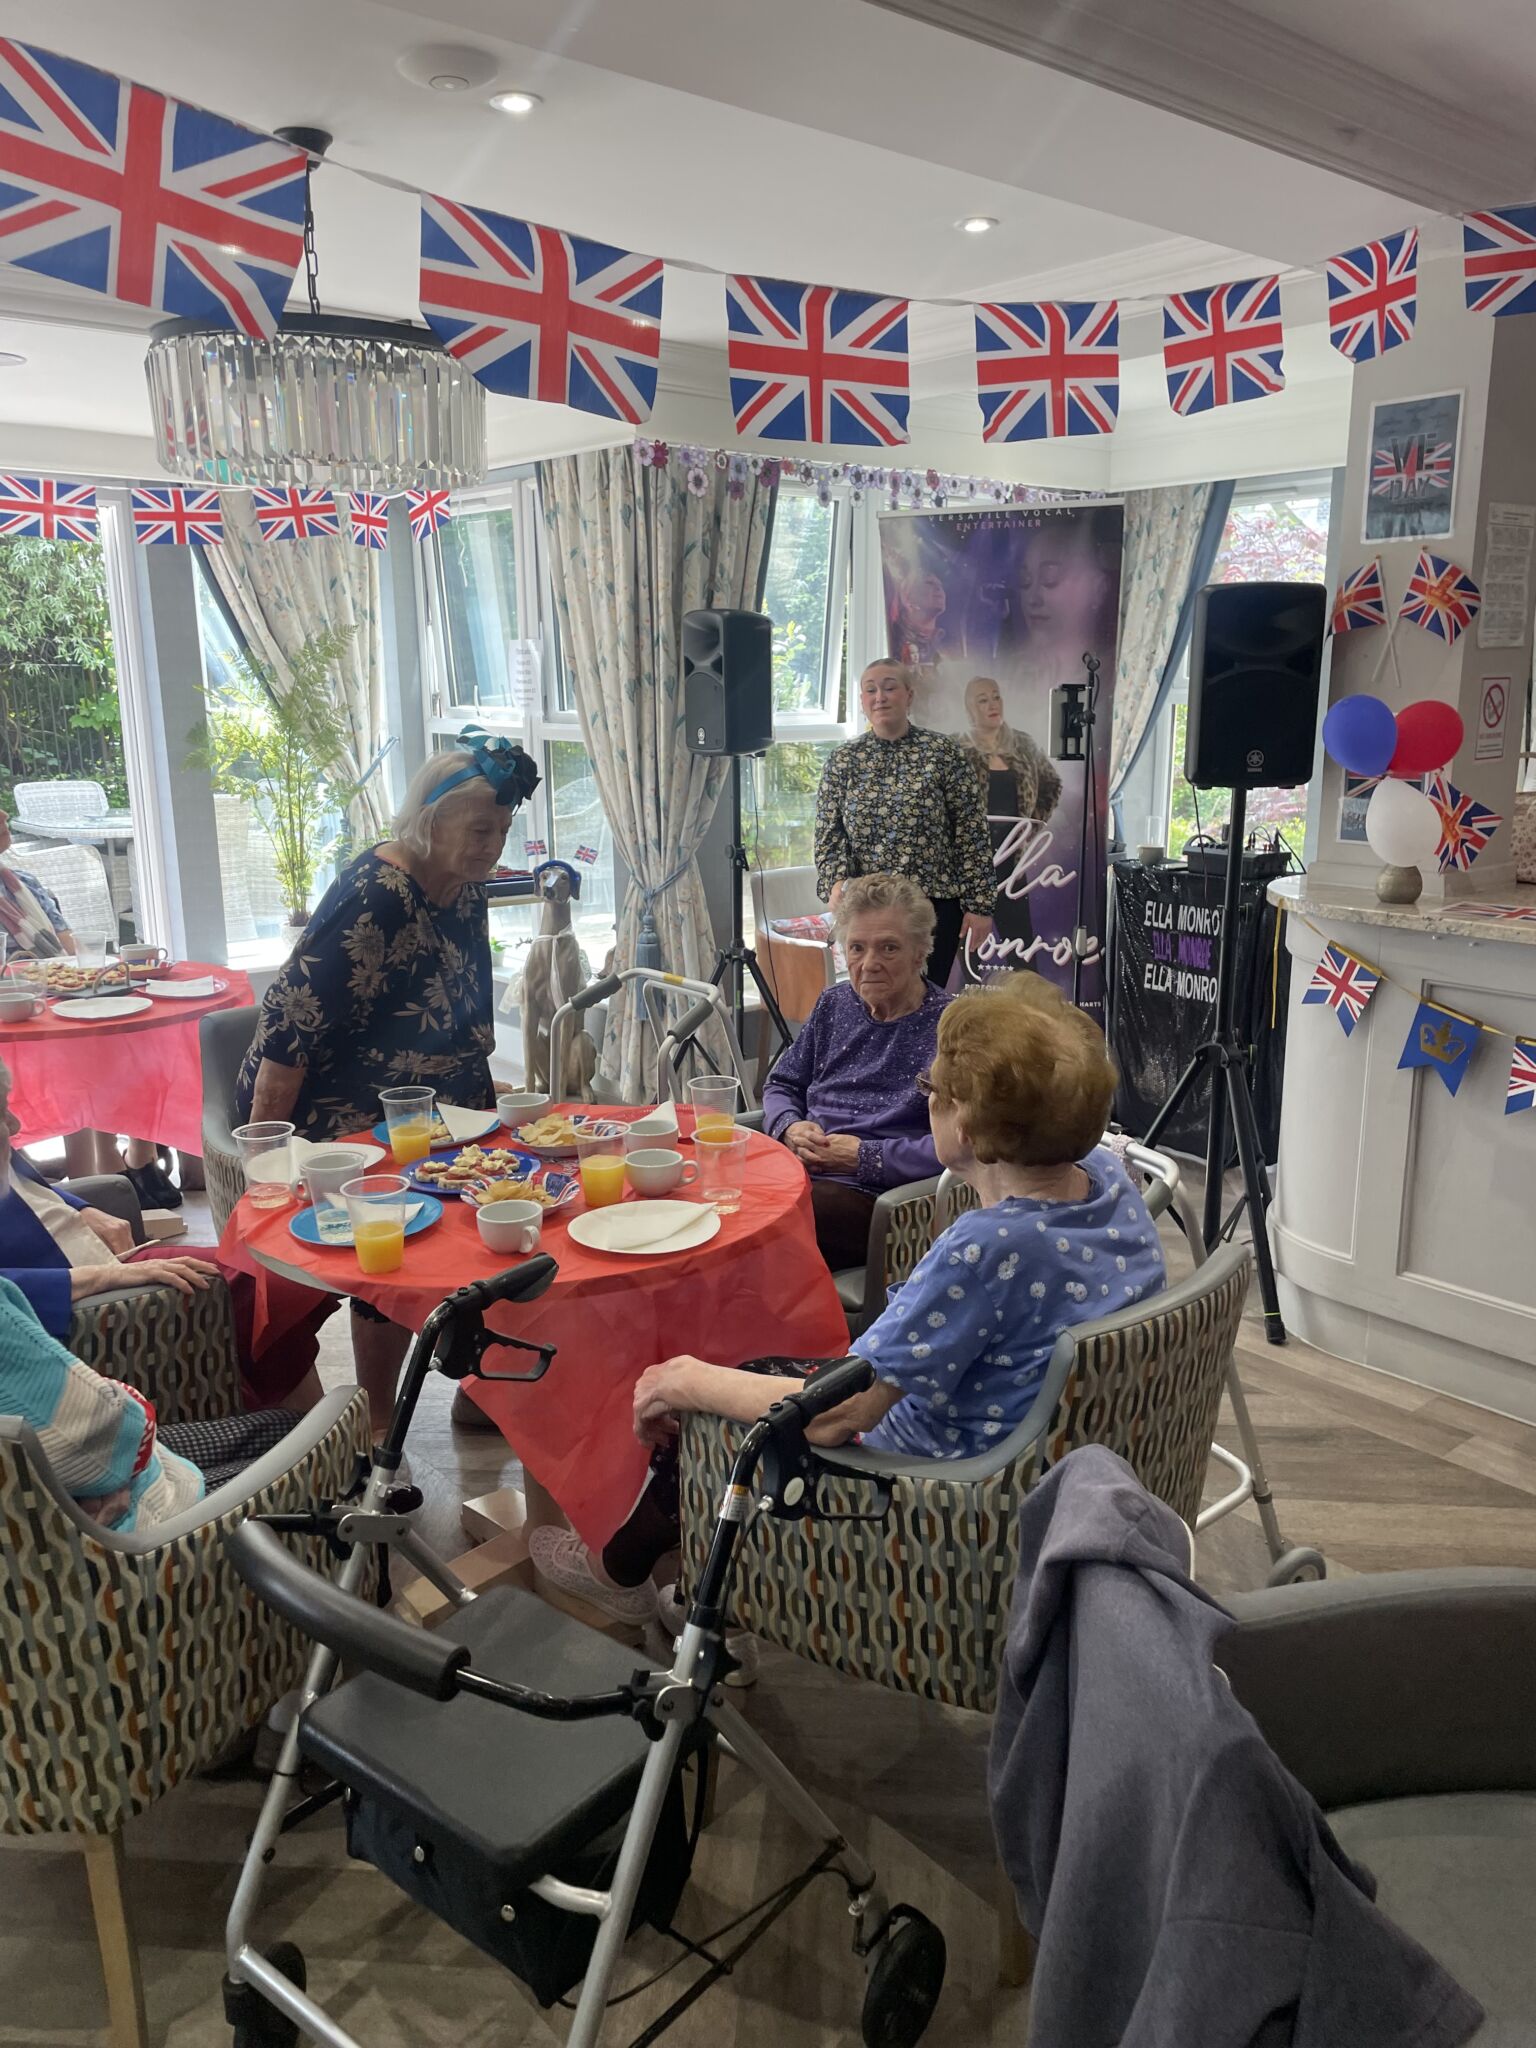 Talented Ella Monroe captivated us with classic 1940s hits from Vera Lynn to the Andrew Sisters, as she entertained all the residents and staff at Hutton Manor Care home in Pudsey